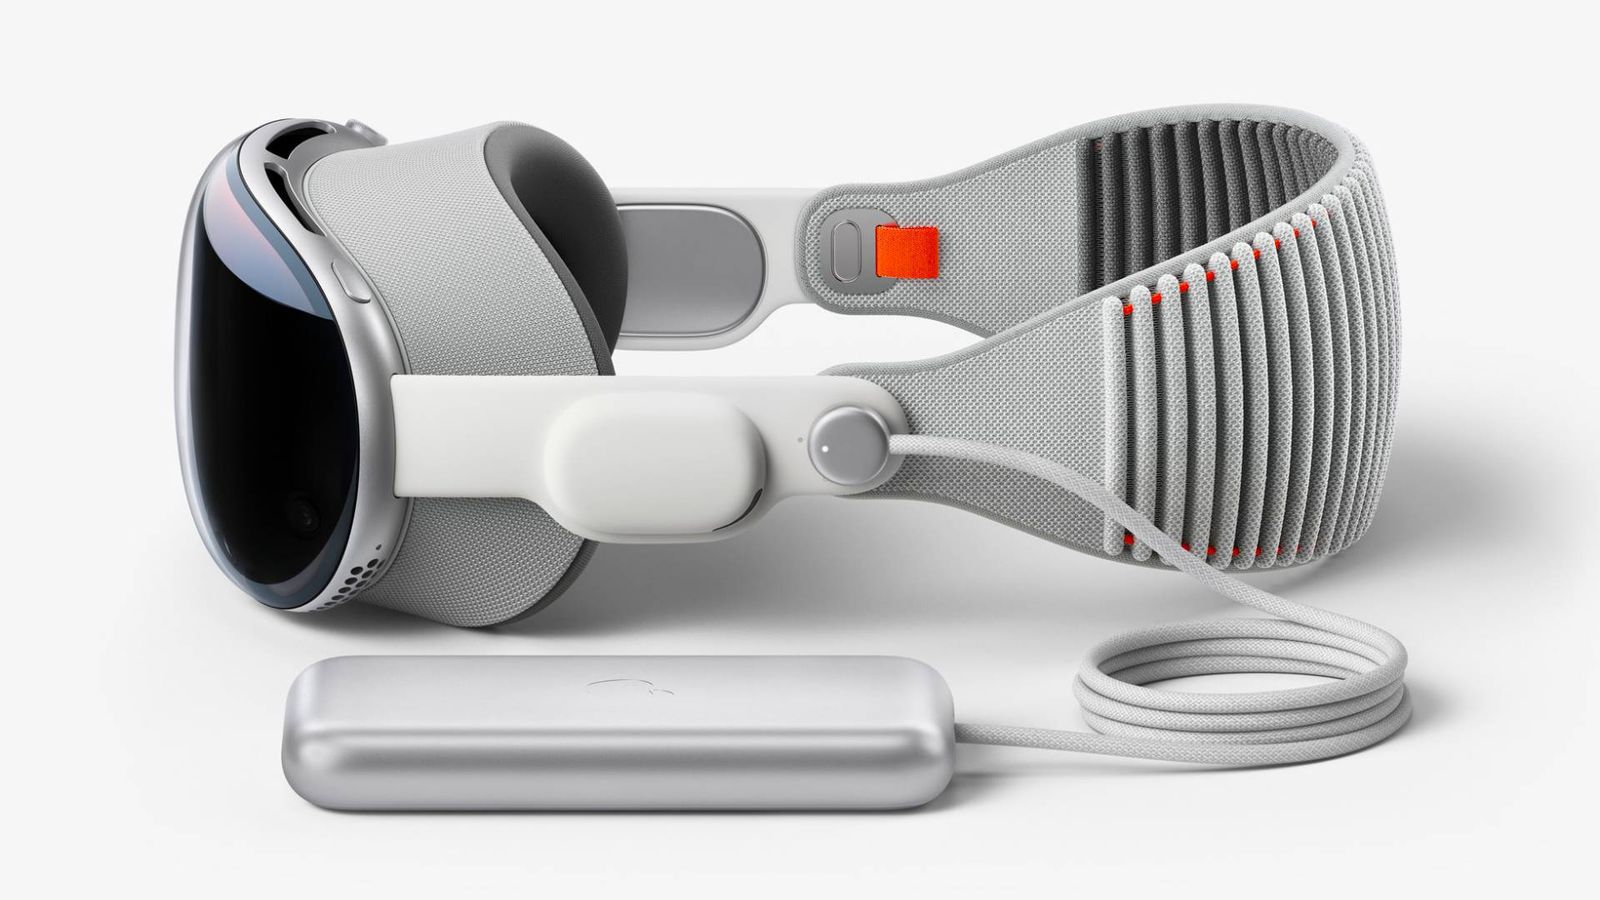 Apple Vision Pro - An image of the headset and its battery pack